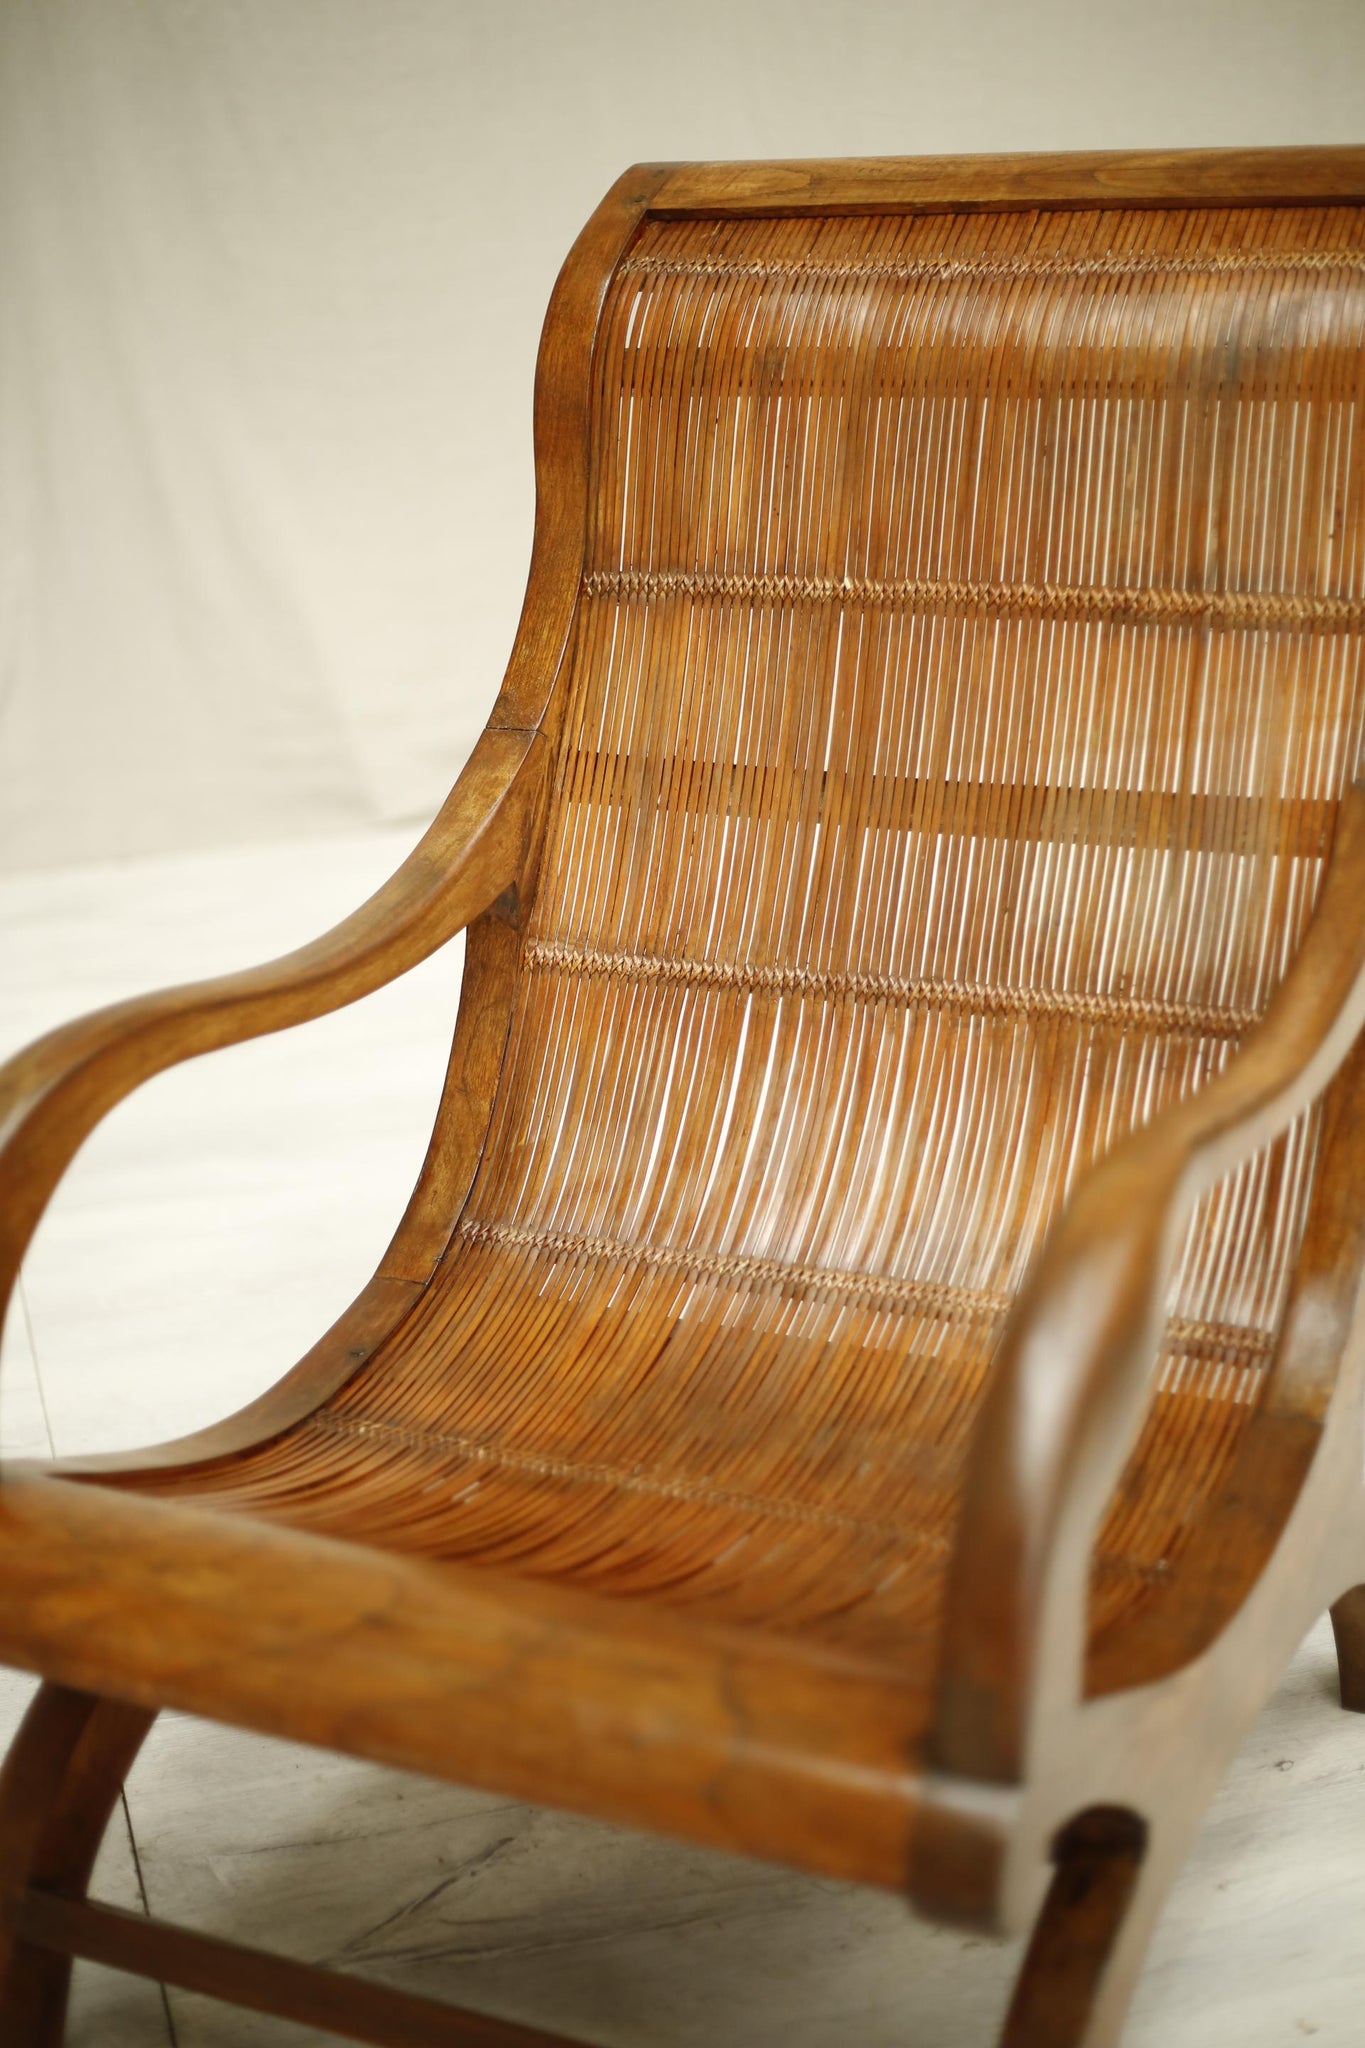 Pair of Antique 20th century Teak and slatted bamboo armchairs - TallBoy Interiors